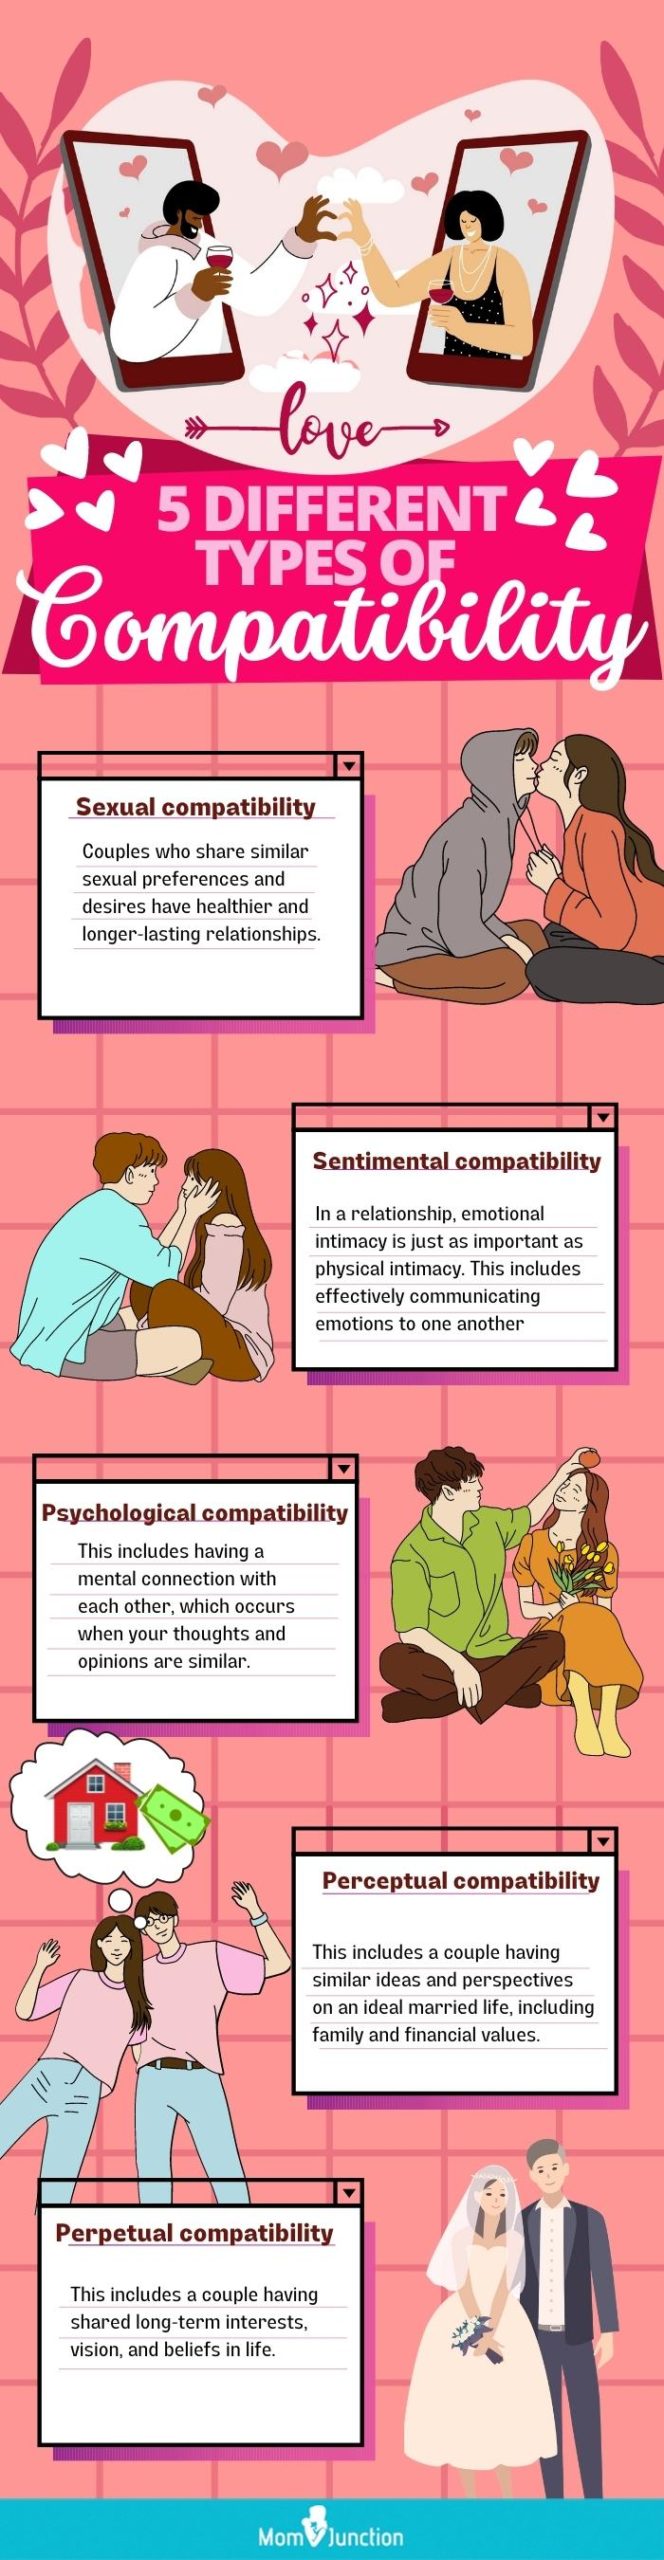 different types of compatibility (infographic)